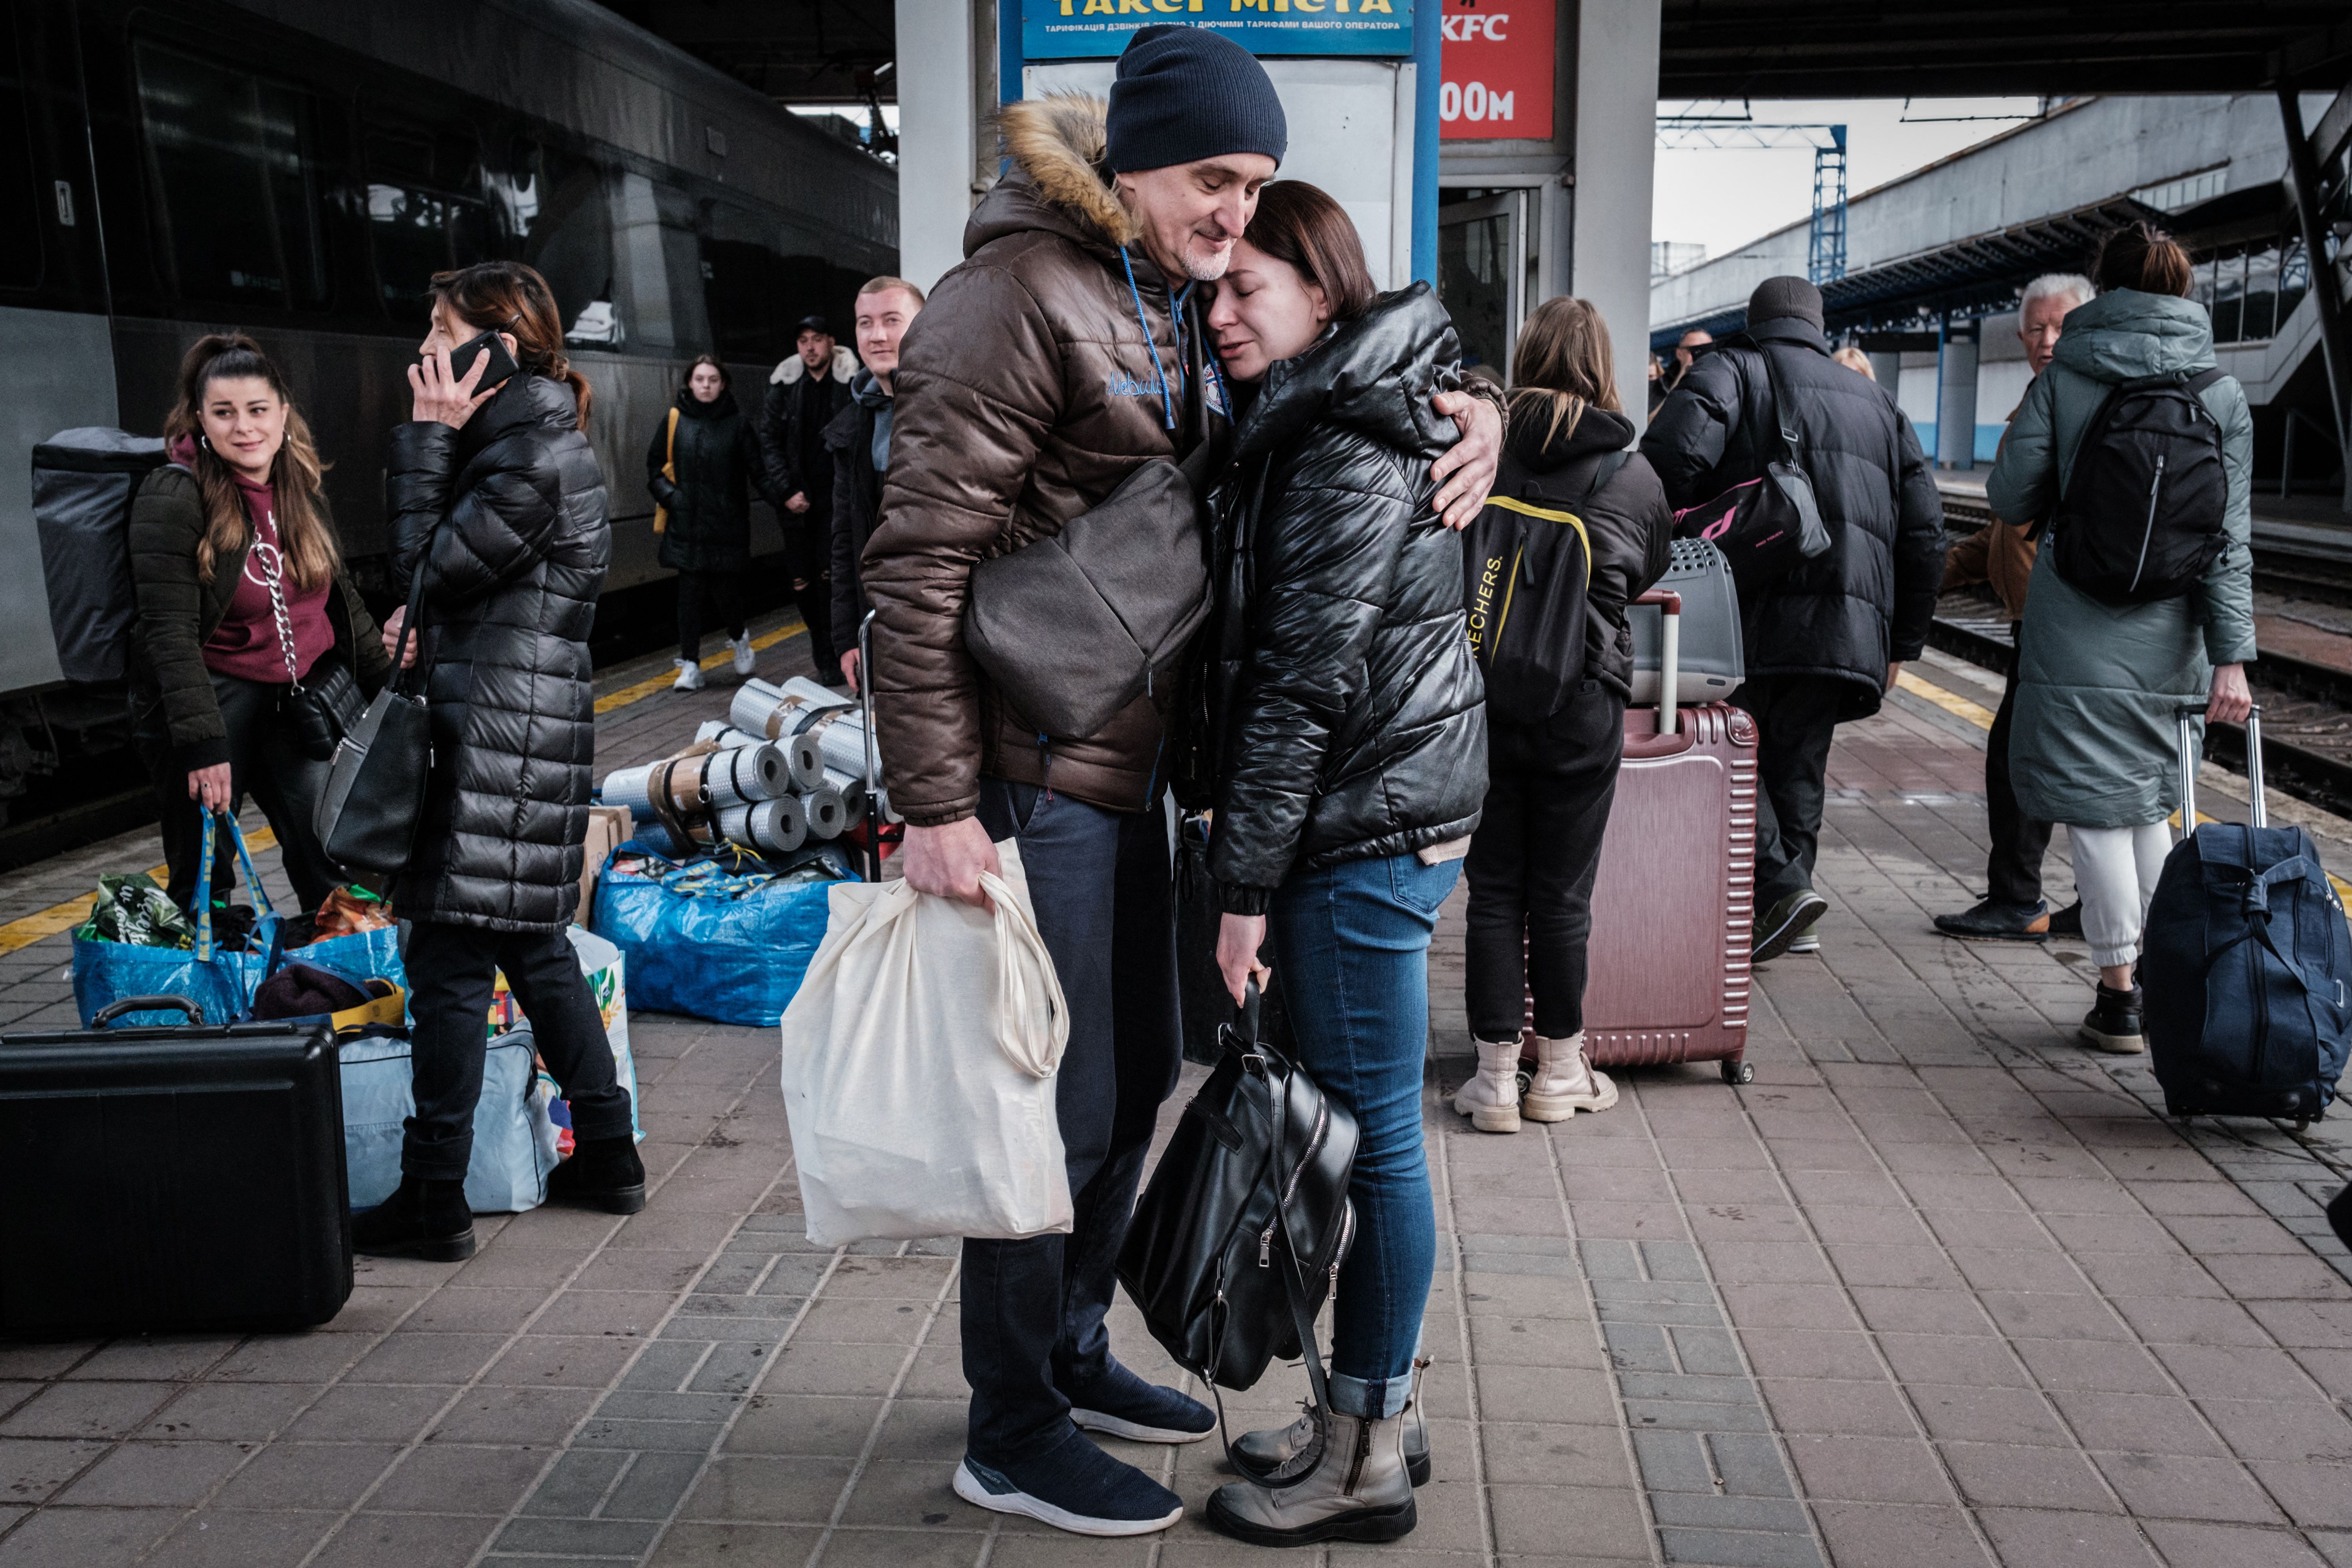 Ihor, center left, welcomes Lyudmila who has returned from neighboring Poland as they stand on a platform at the Kyiv-Pasazhyrskyi train station, in the Ukrainian capital Kyiv on April 17.